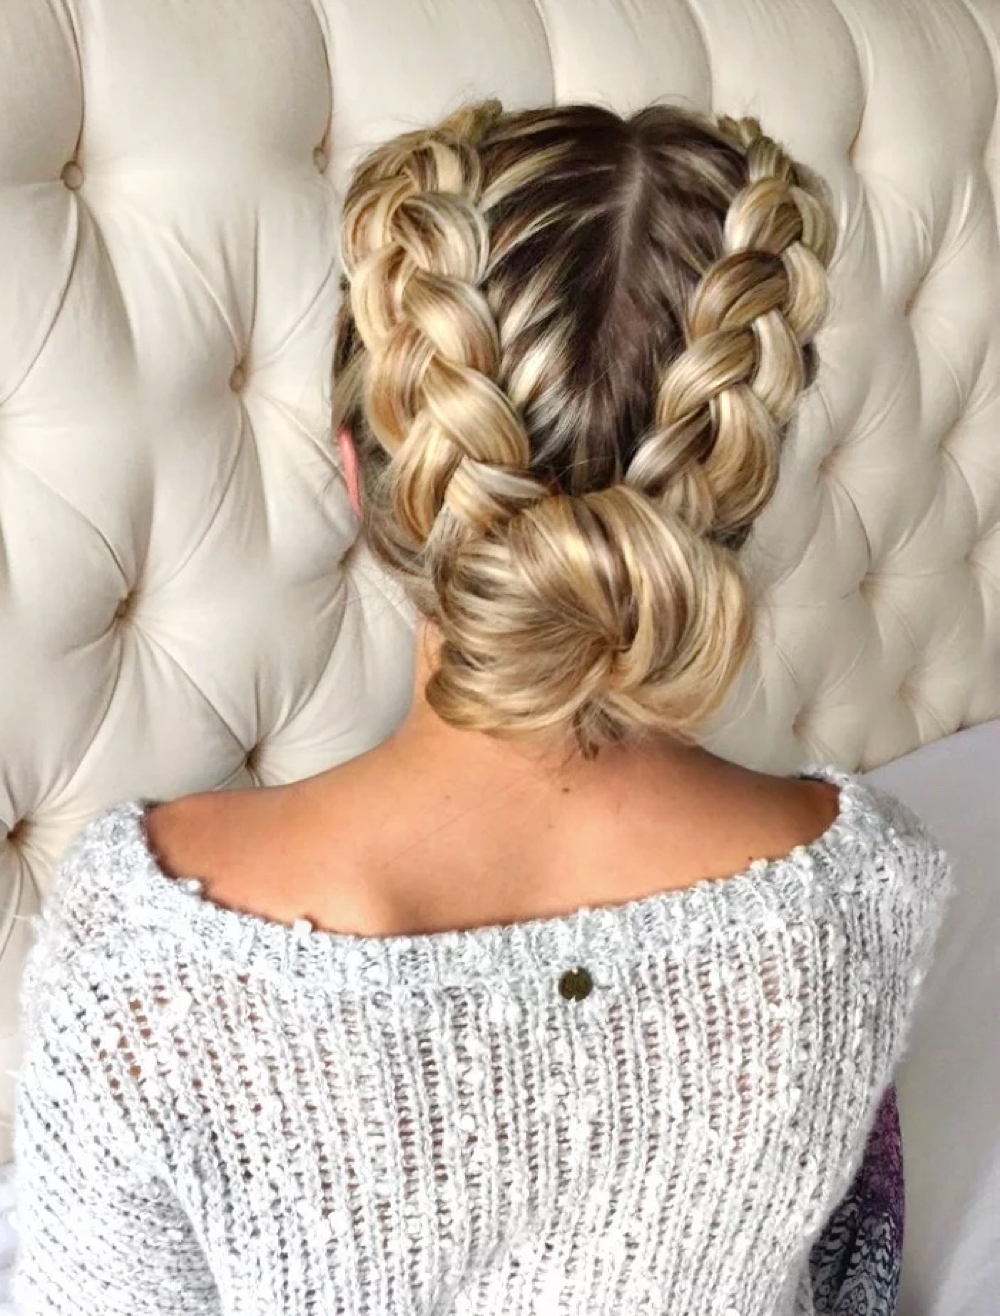 29 Gorgeous Braided Updo Ideas For 2019 with regard to Hairstyles With Plaits Up